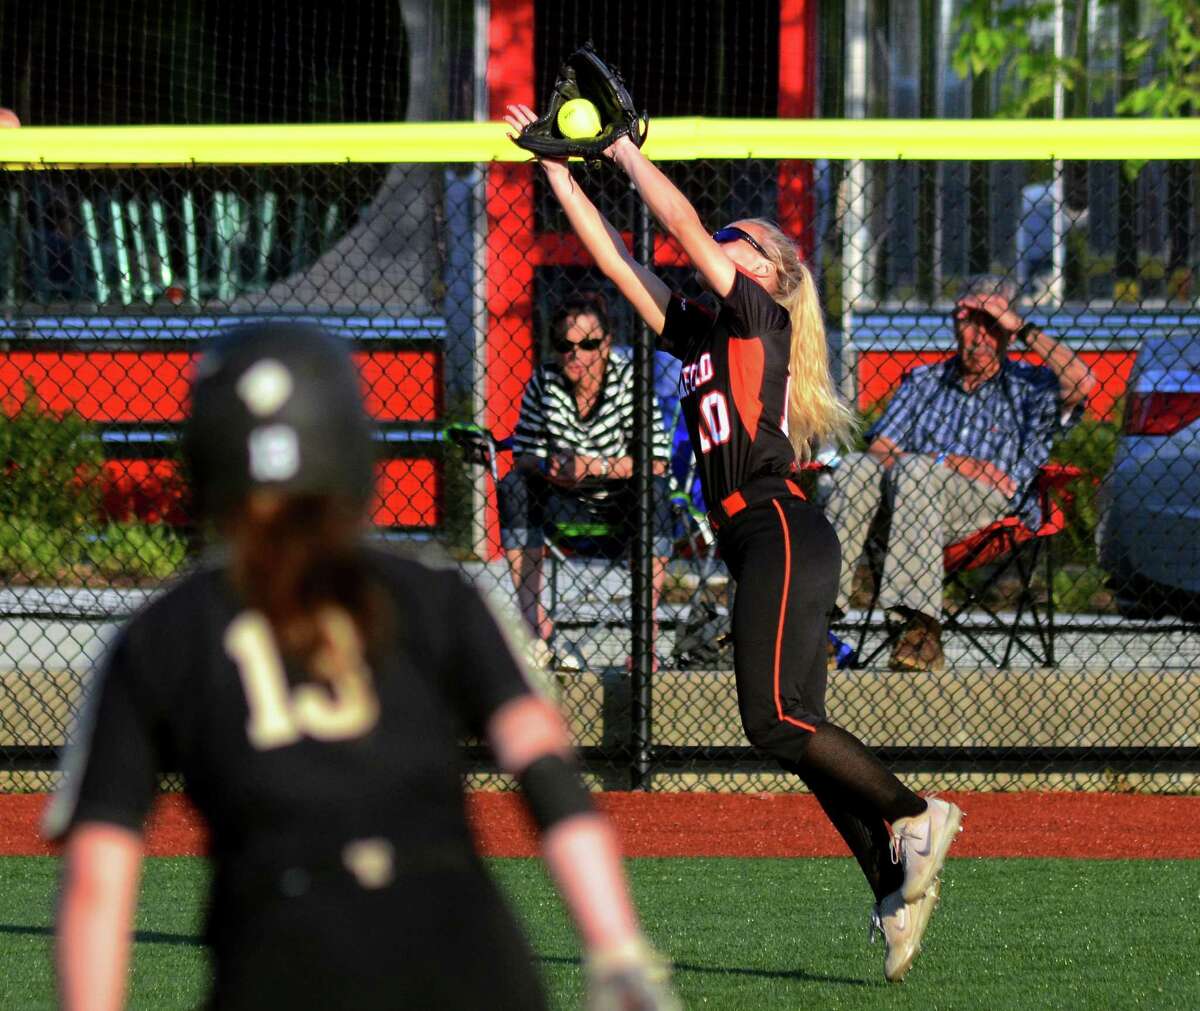 Stamford’s Brycelin Stalteri cathces a Trumbull pop-fly during the FCIAC semifinals on Thursday.